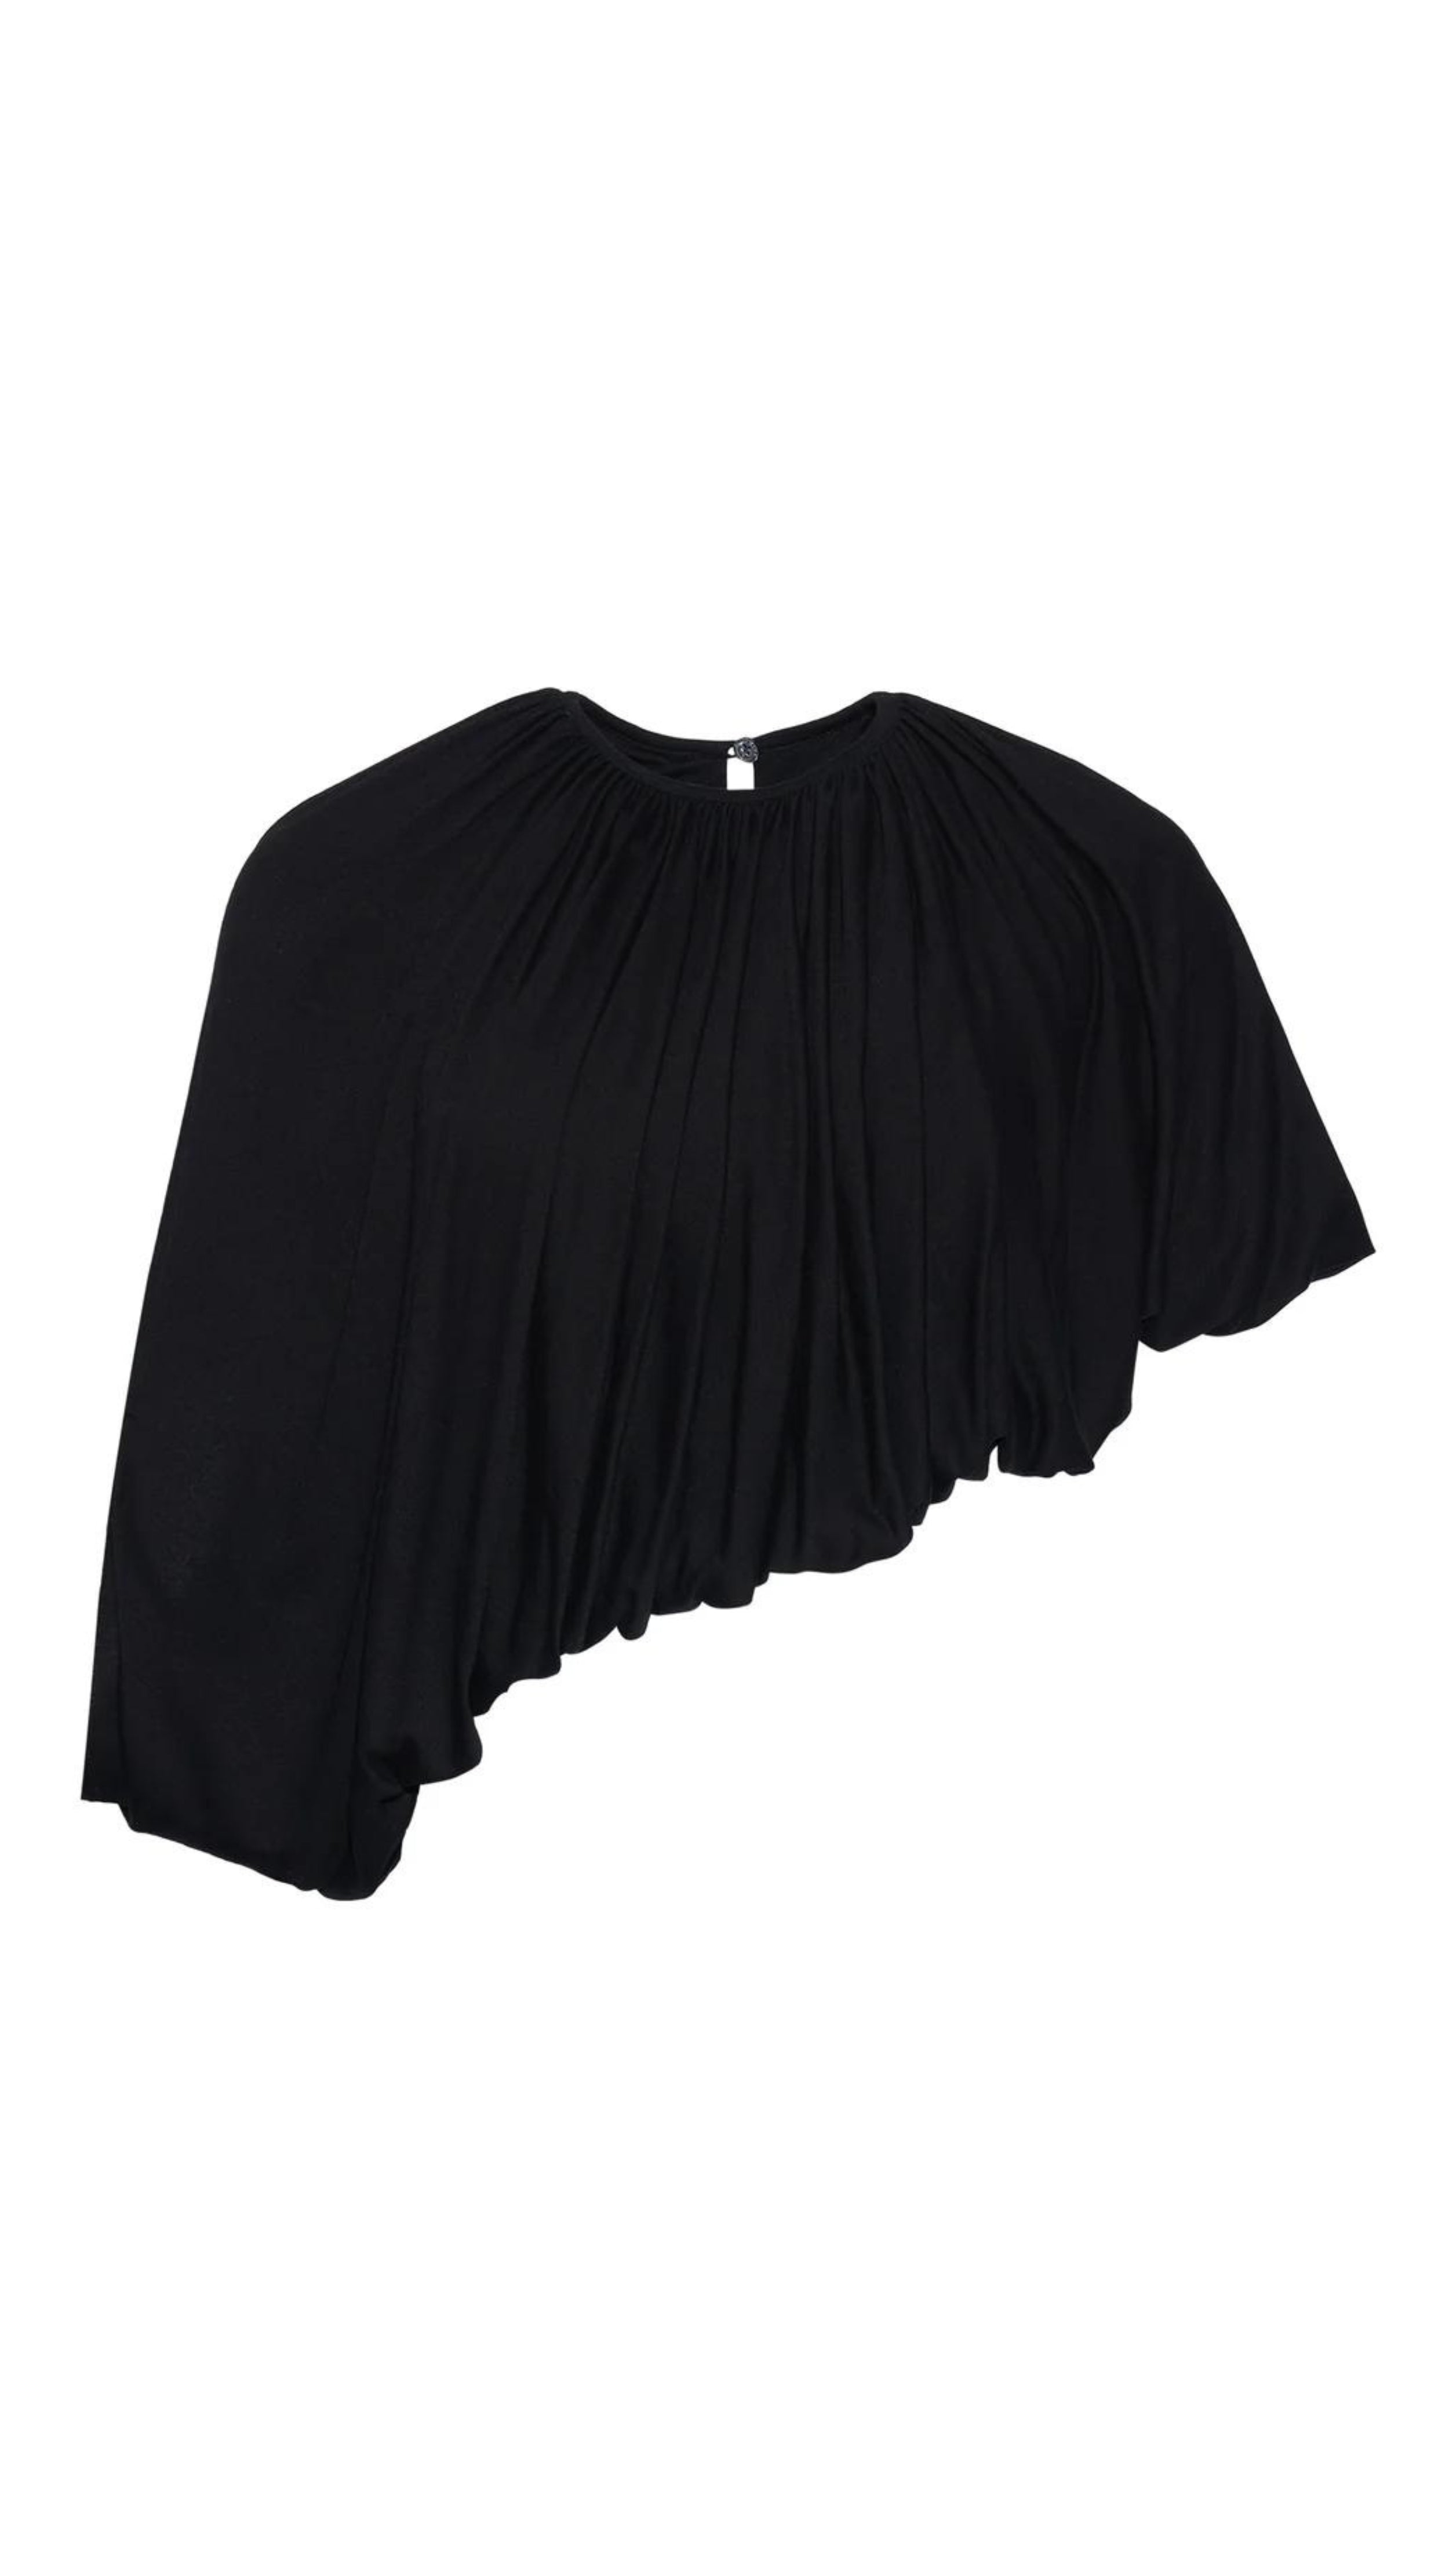 Altuzarra Naxos Top in Black. Draped jersey create a fluid look with an asymmetrical hemline. Product photo shown from the front